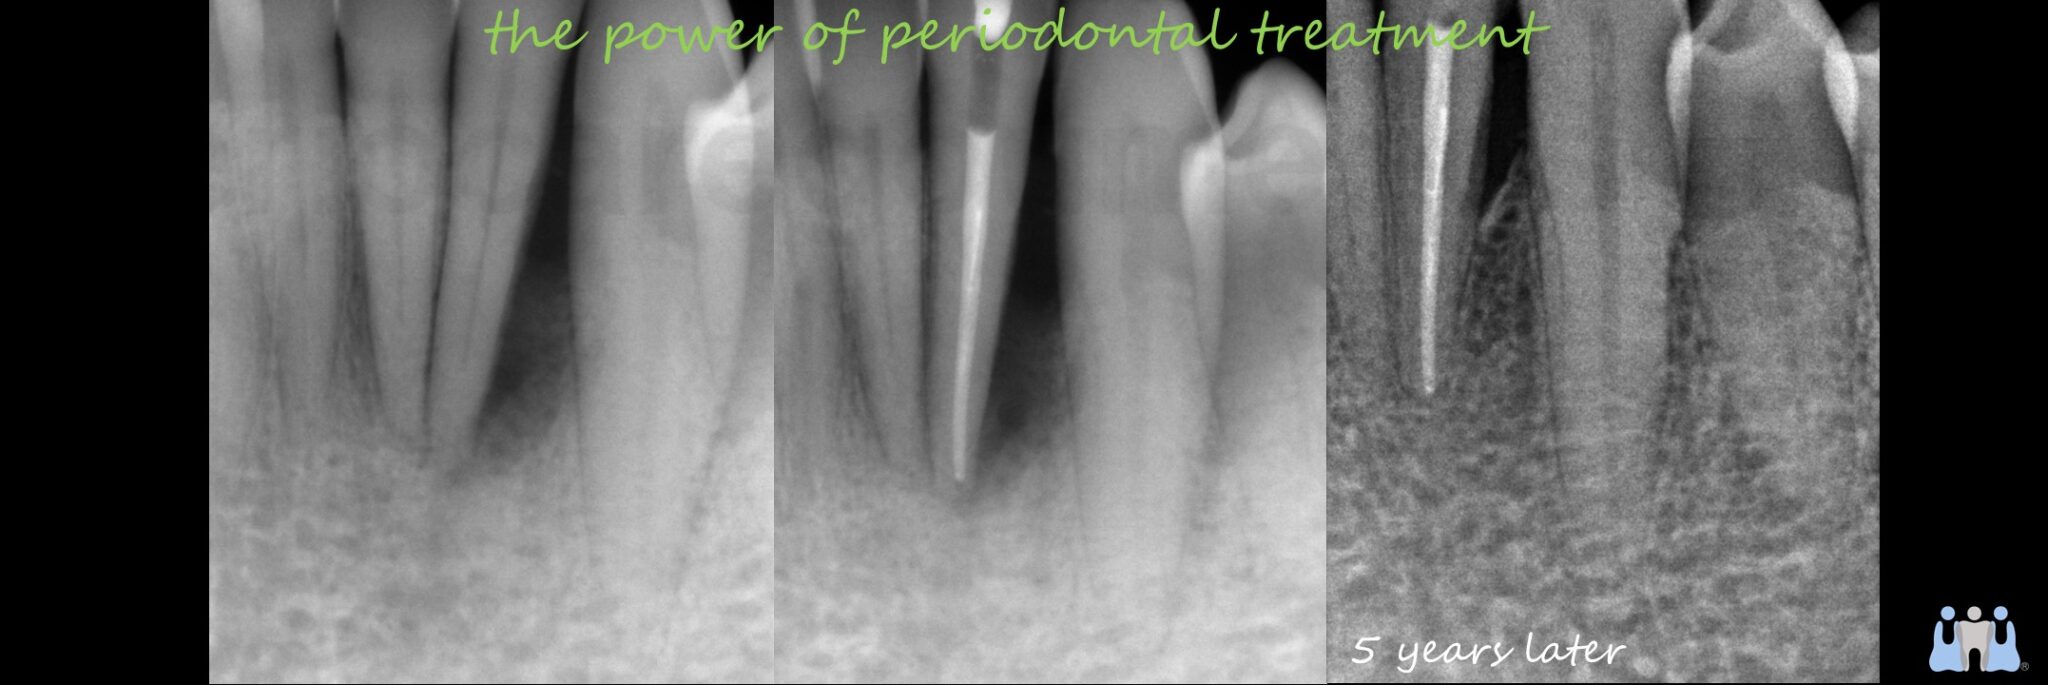 Title:Use of Emdogain in a lower lateral incisor with severe periodontal destruction.